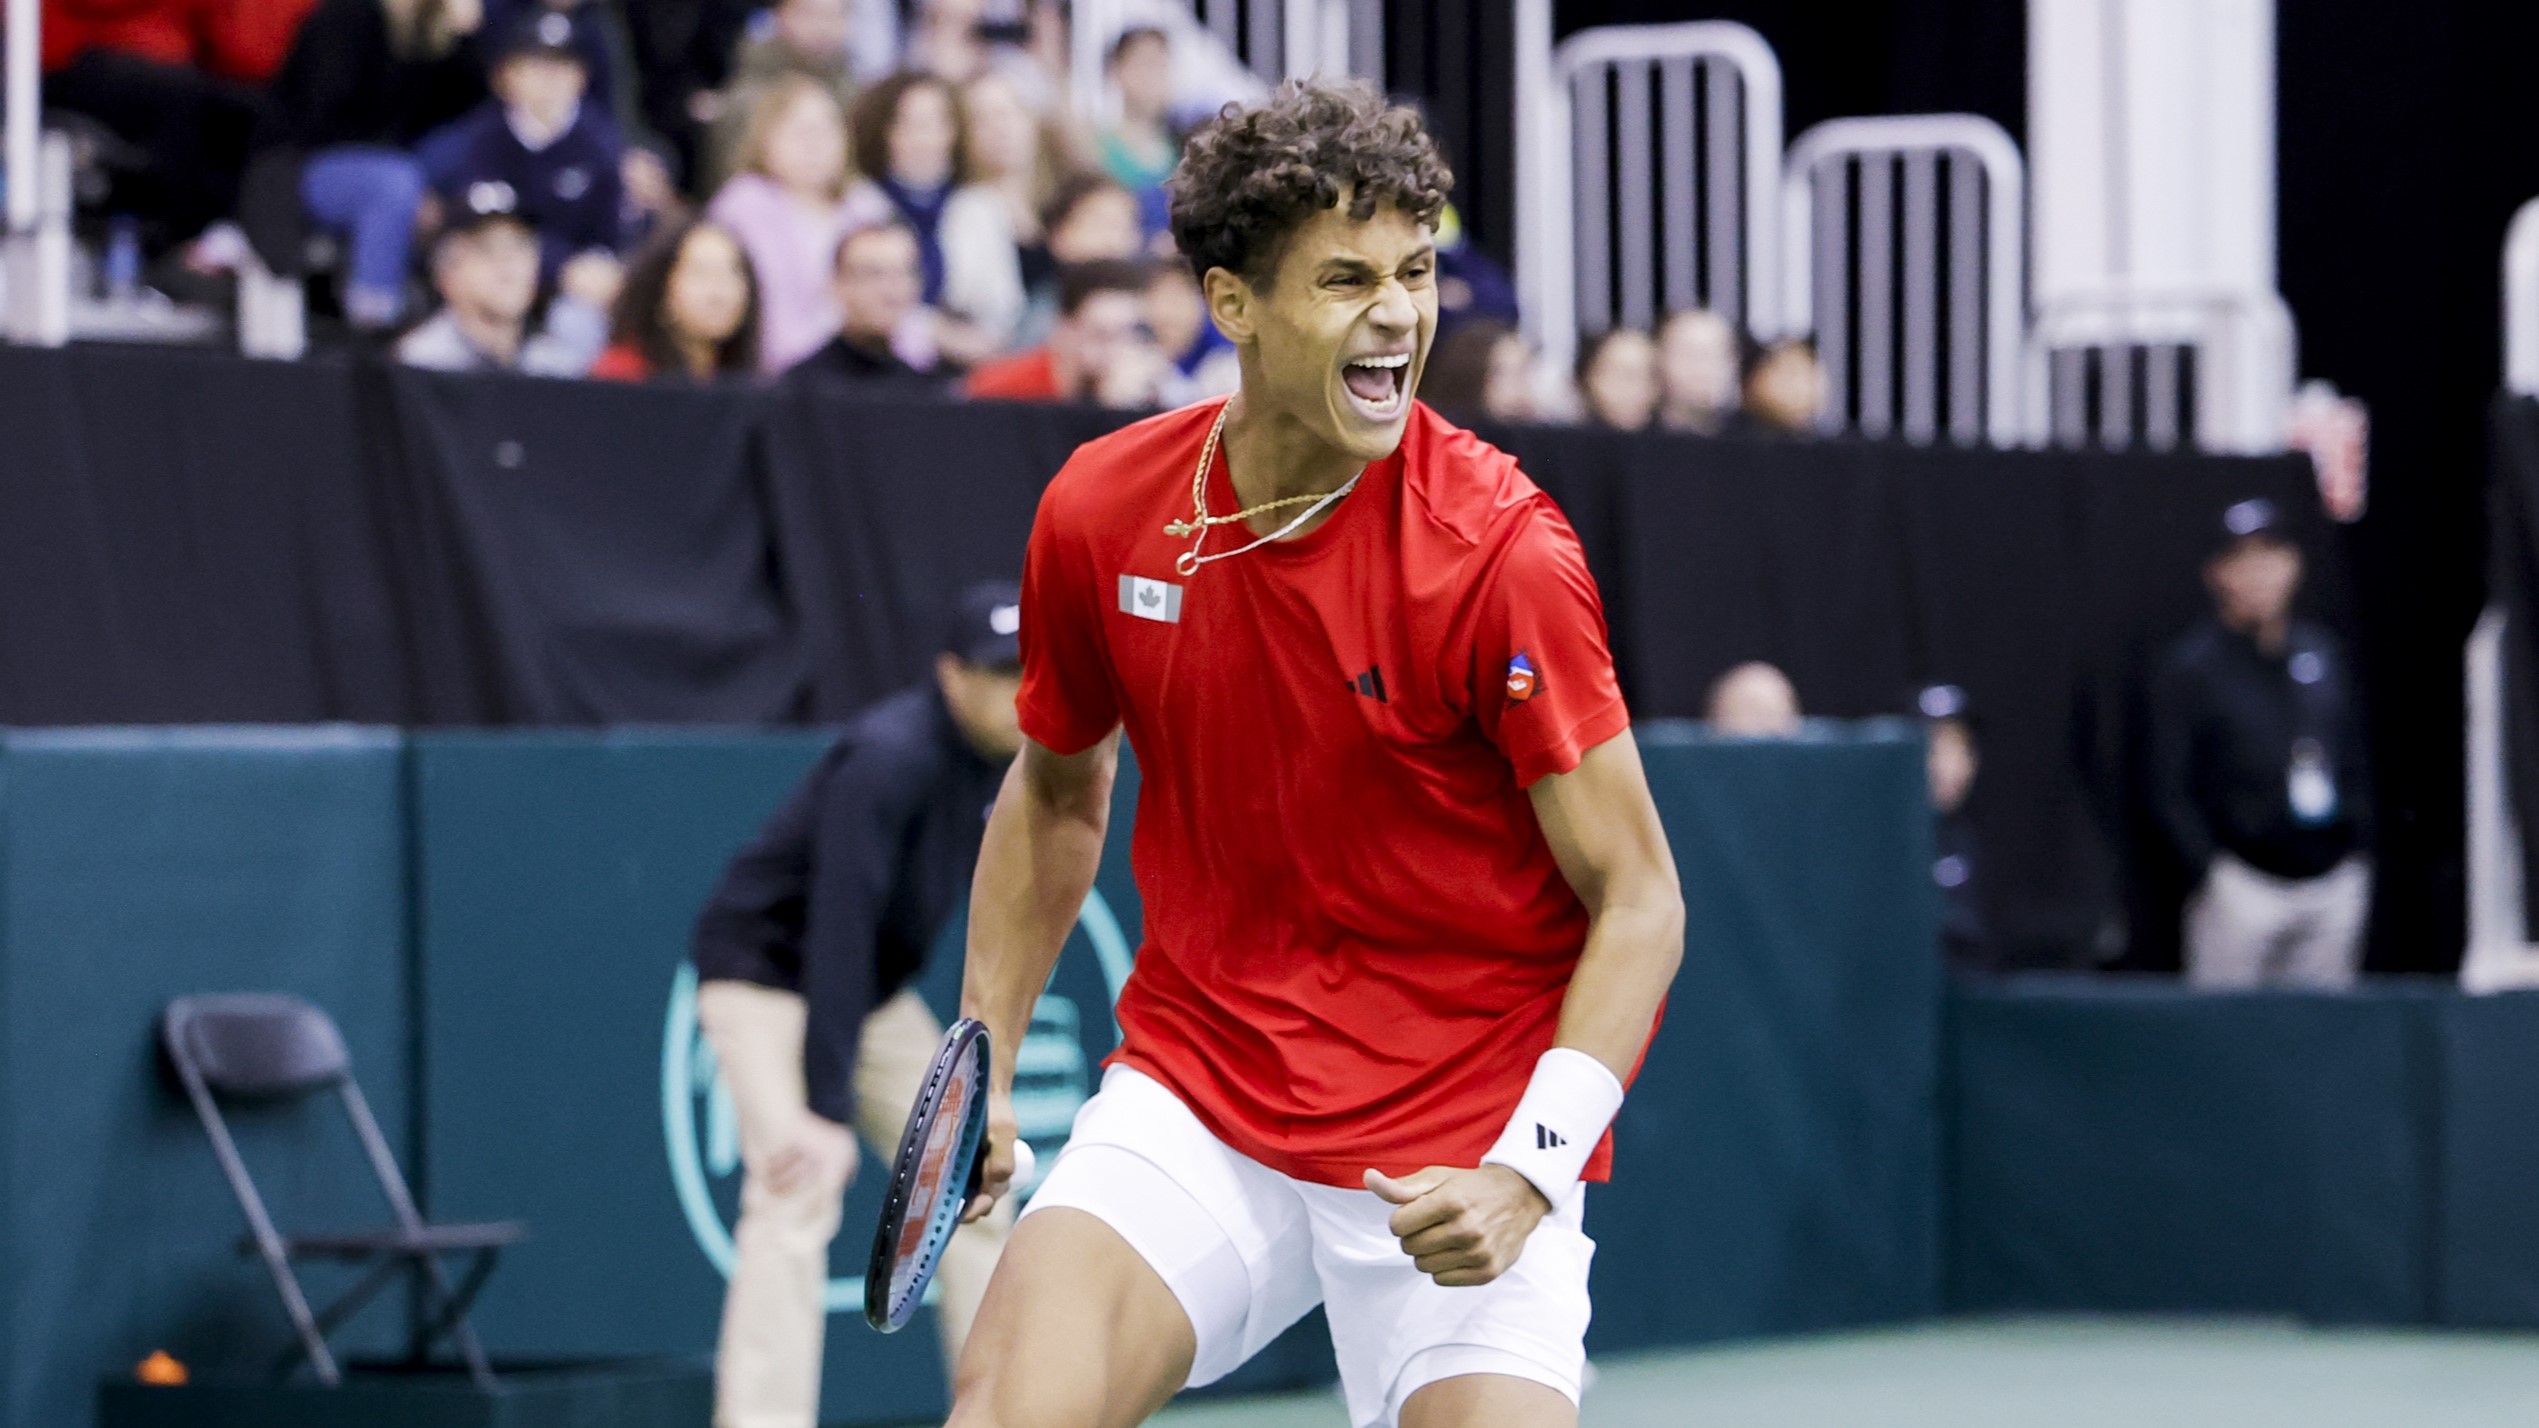 Gabriel Diallo screams in celebration during his match for Canada against Korea on Friday at the Davis Cup.